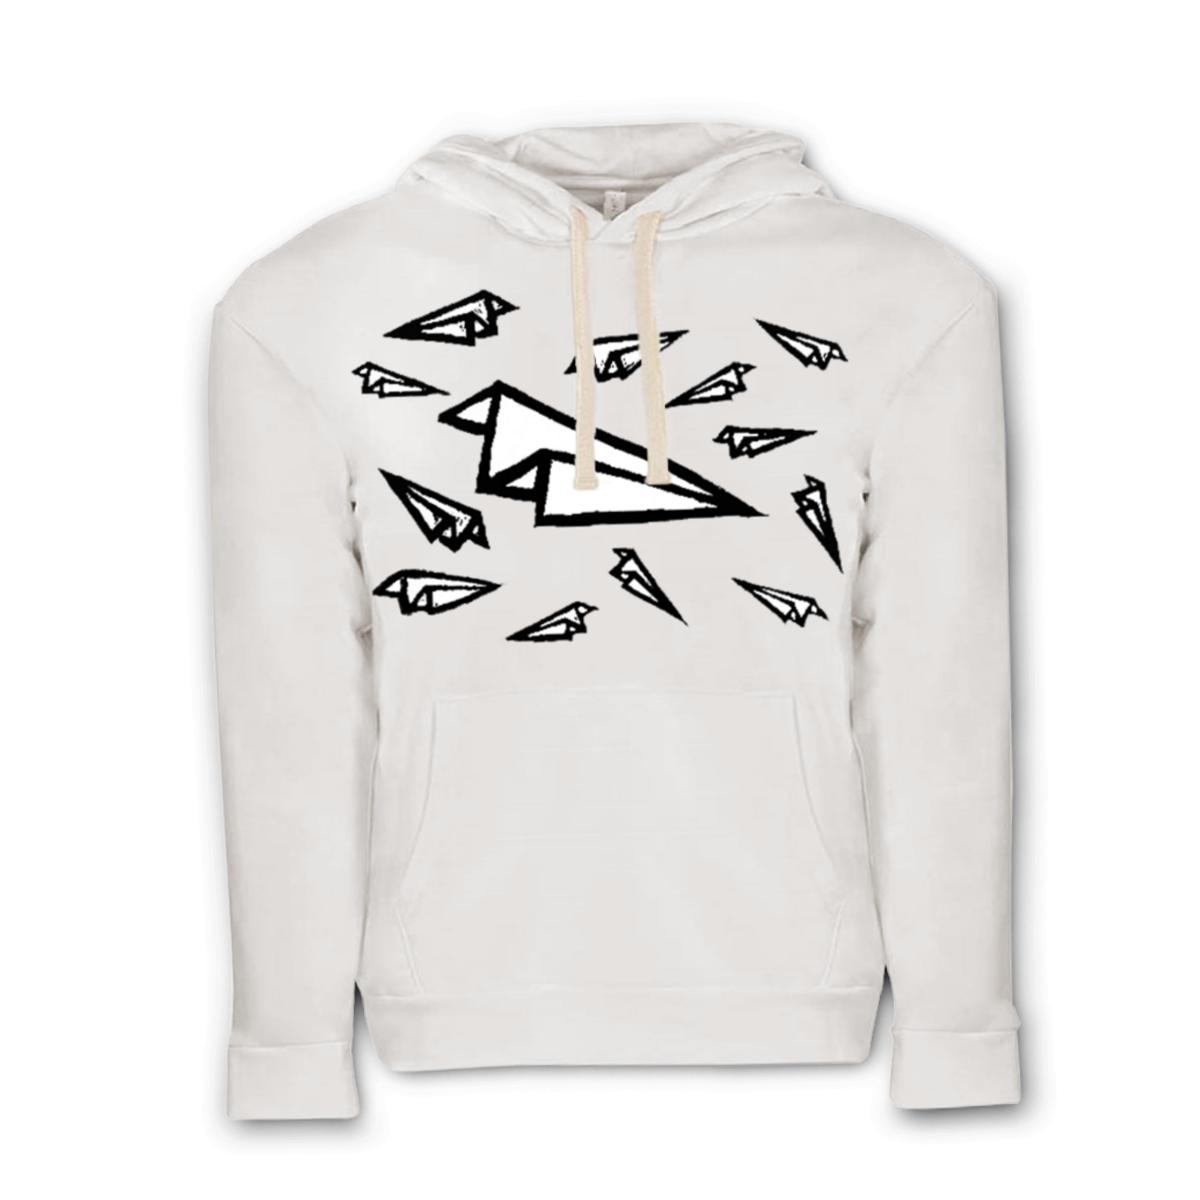 Airplane Frenzy Unisex Pullover Hoodie Small white